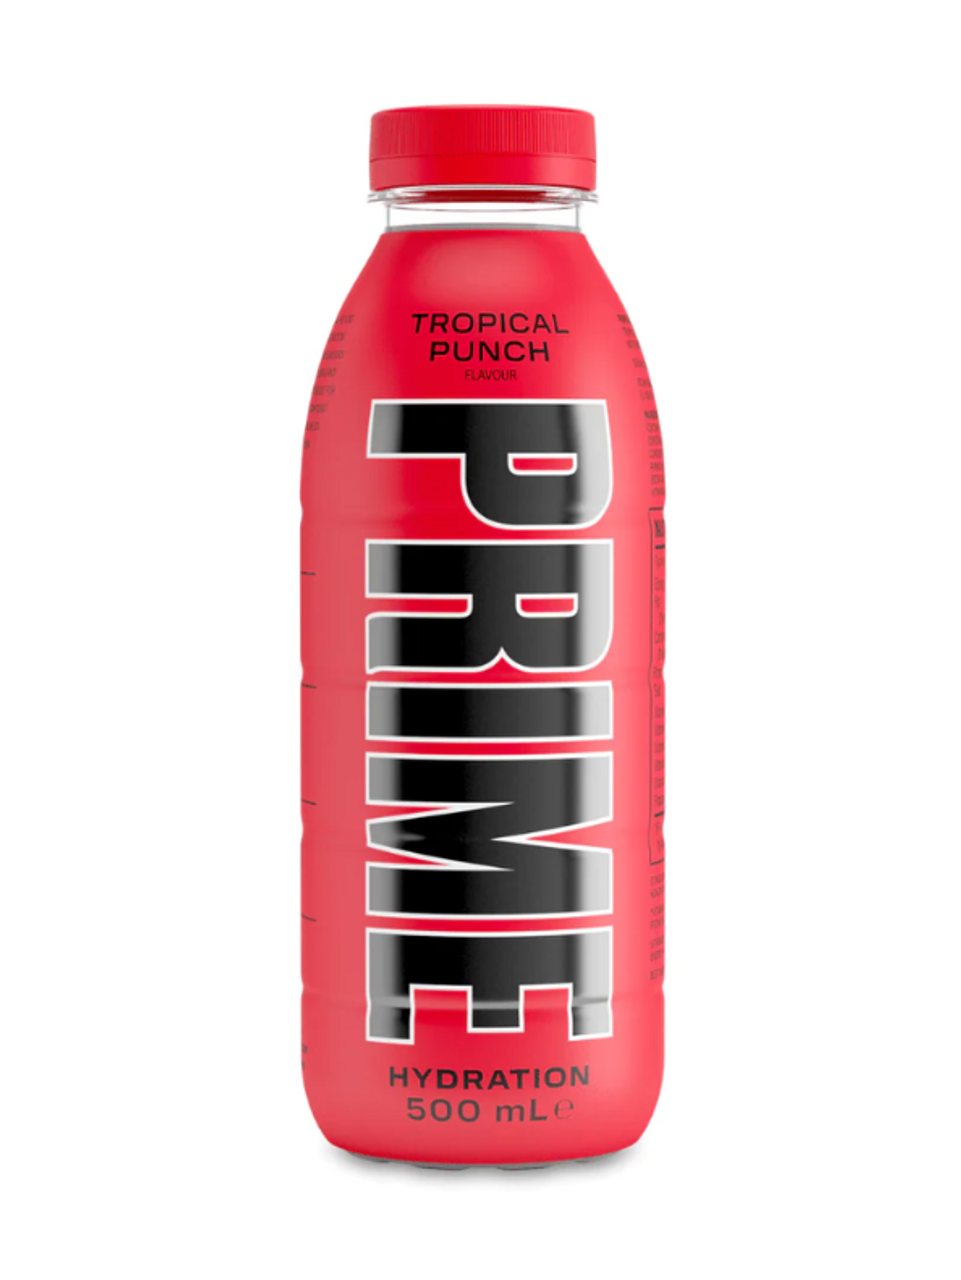 PRIME Hydration Tropical Punch Bottles 500ml x 12